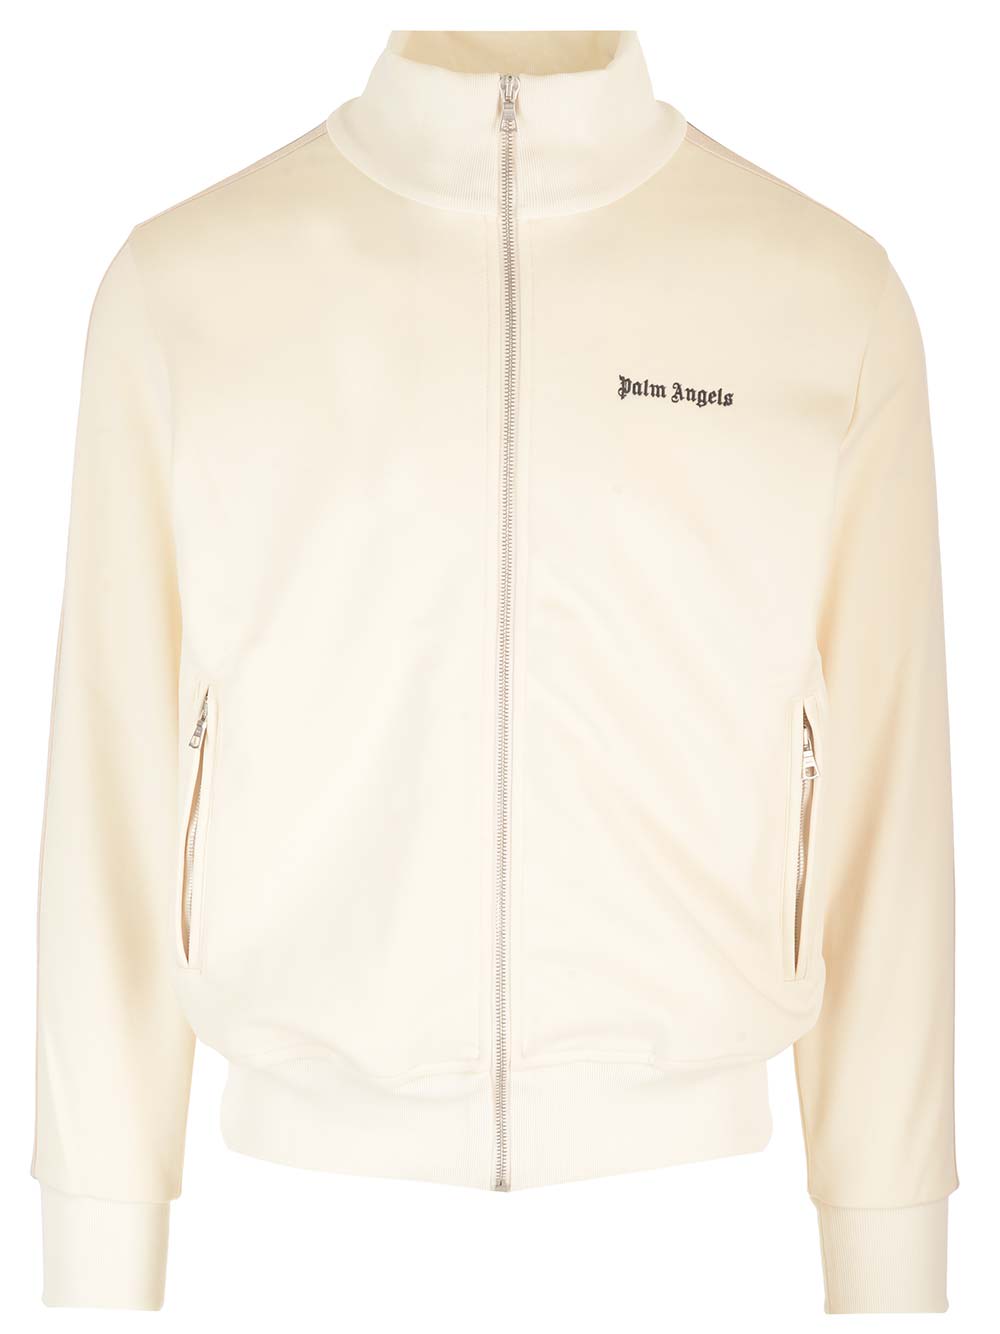 Track Jacket In Butter-colored Technical Fabric